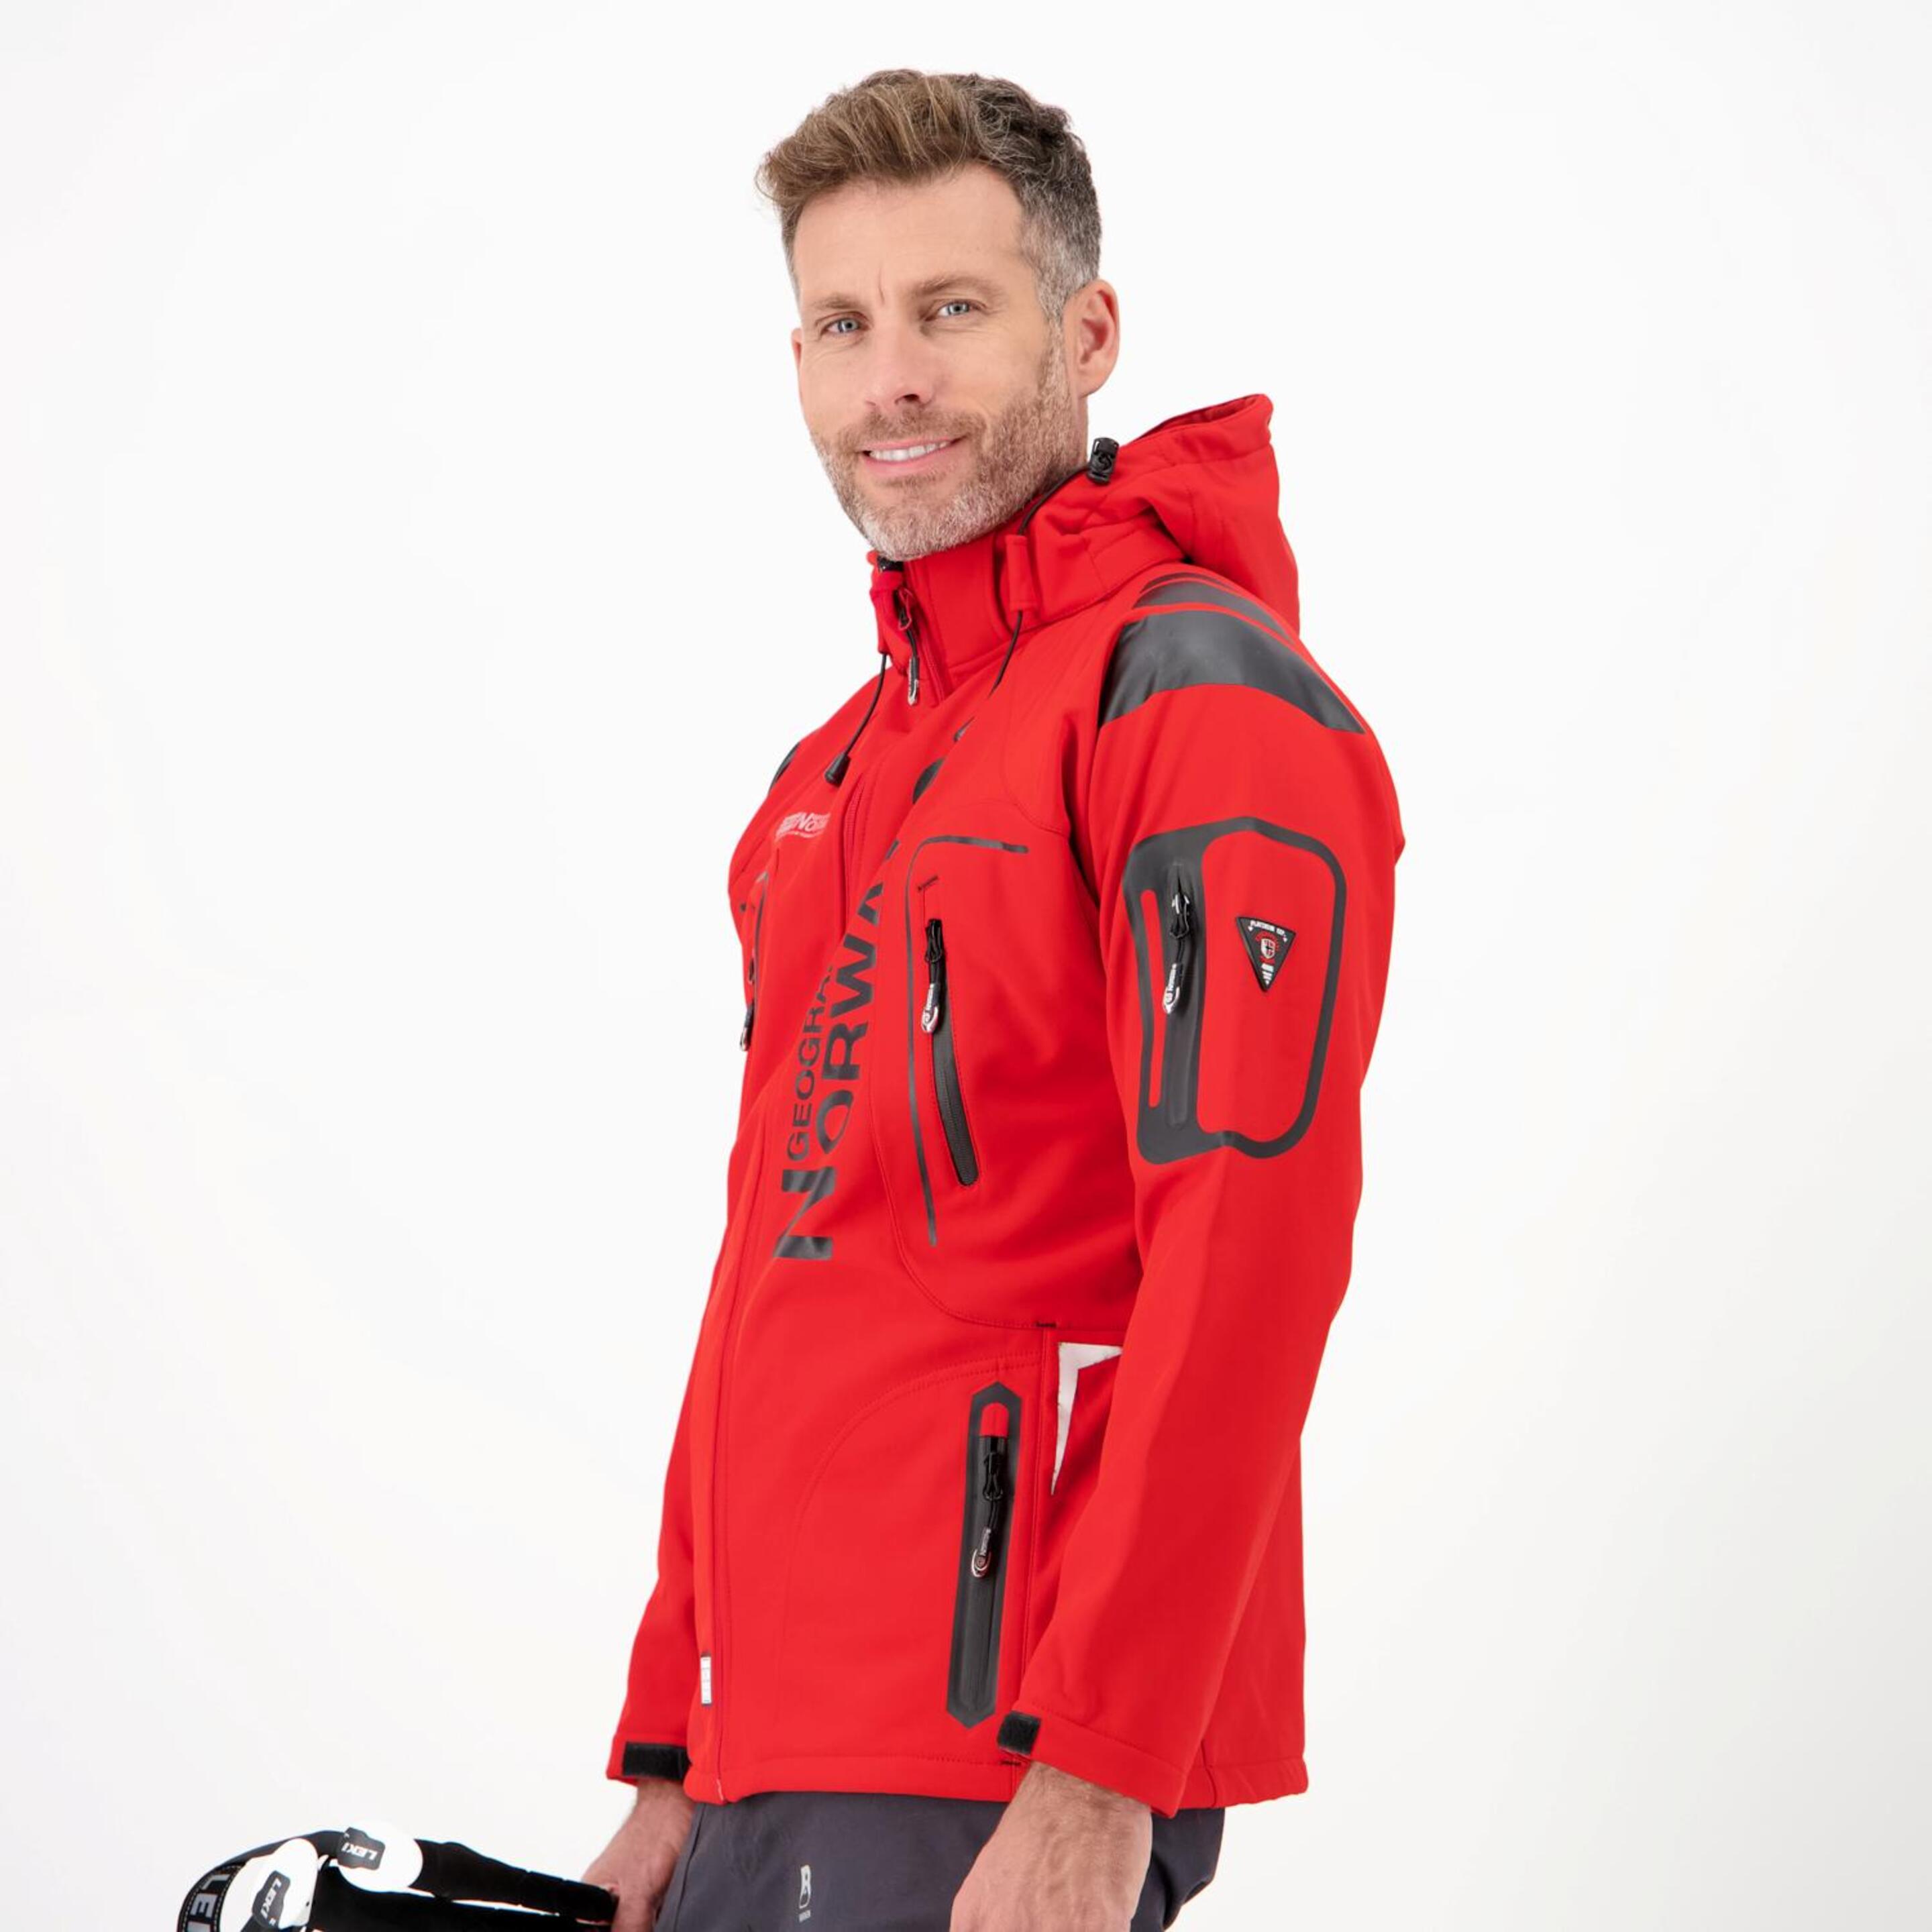 Geographical Norway Techno